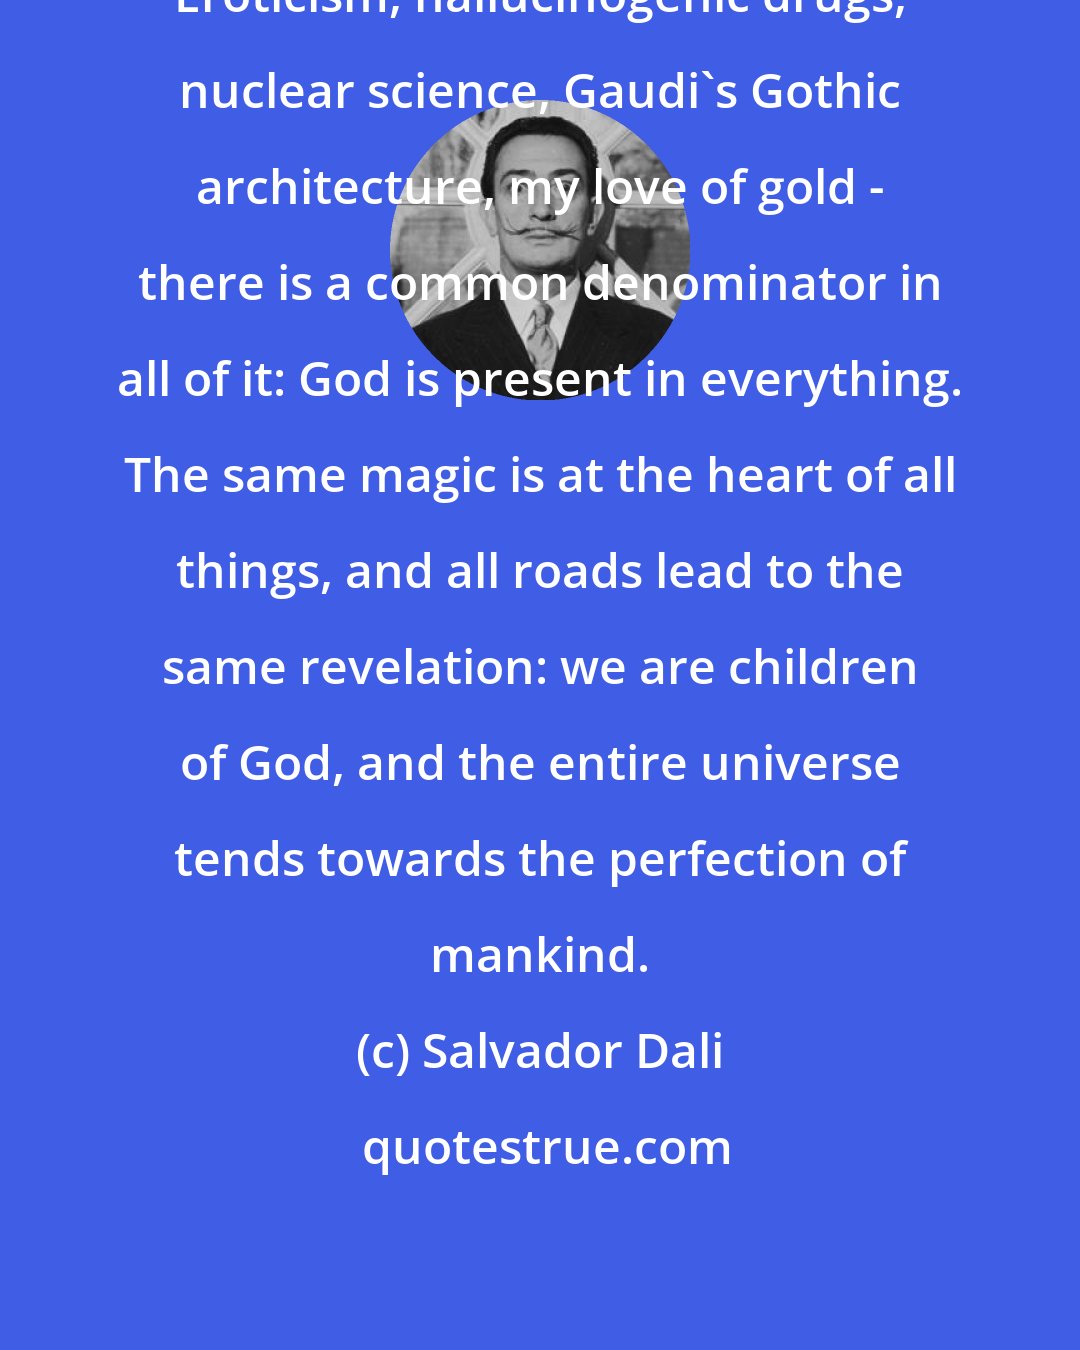 Salvador Dali: Eroticism, hallucinogenic drugs, nuclear science, Gaudi's Gothic architecture, my love of gold - there is a common denominator in all of it: God is present in everything. The same magic is at the heart of all things, and all roads lead to the same revelation: we are children of God, and the entire universe tends towards the perfection of mankind.